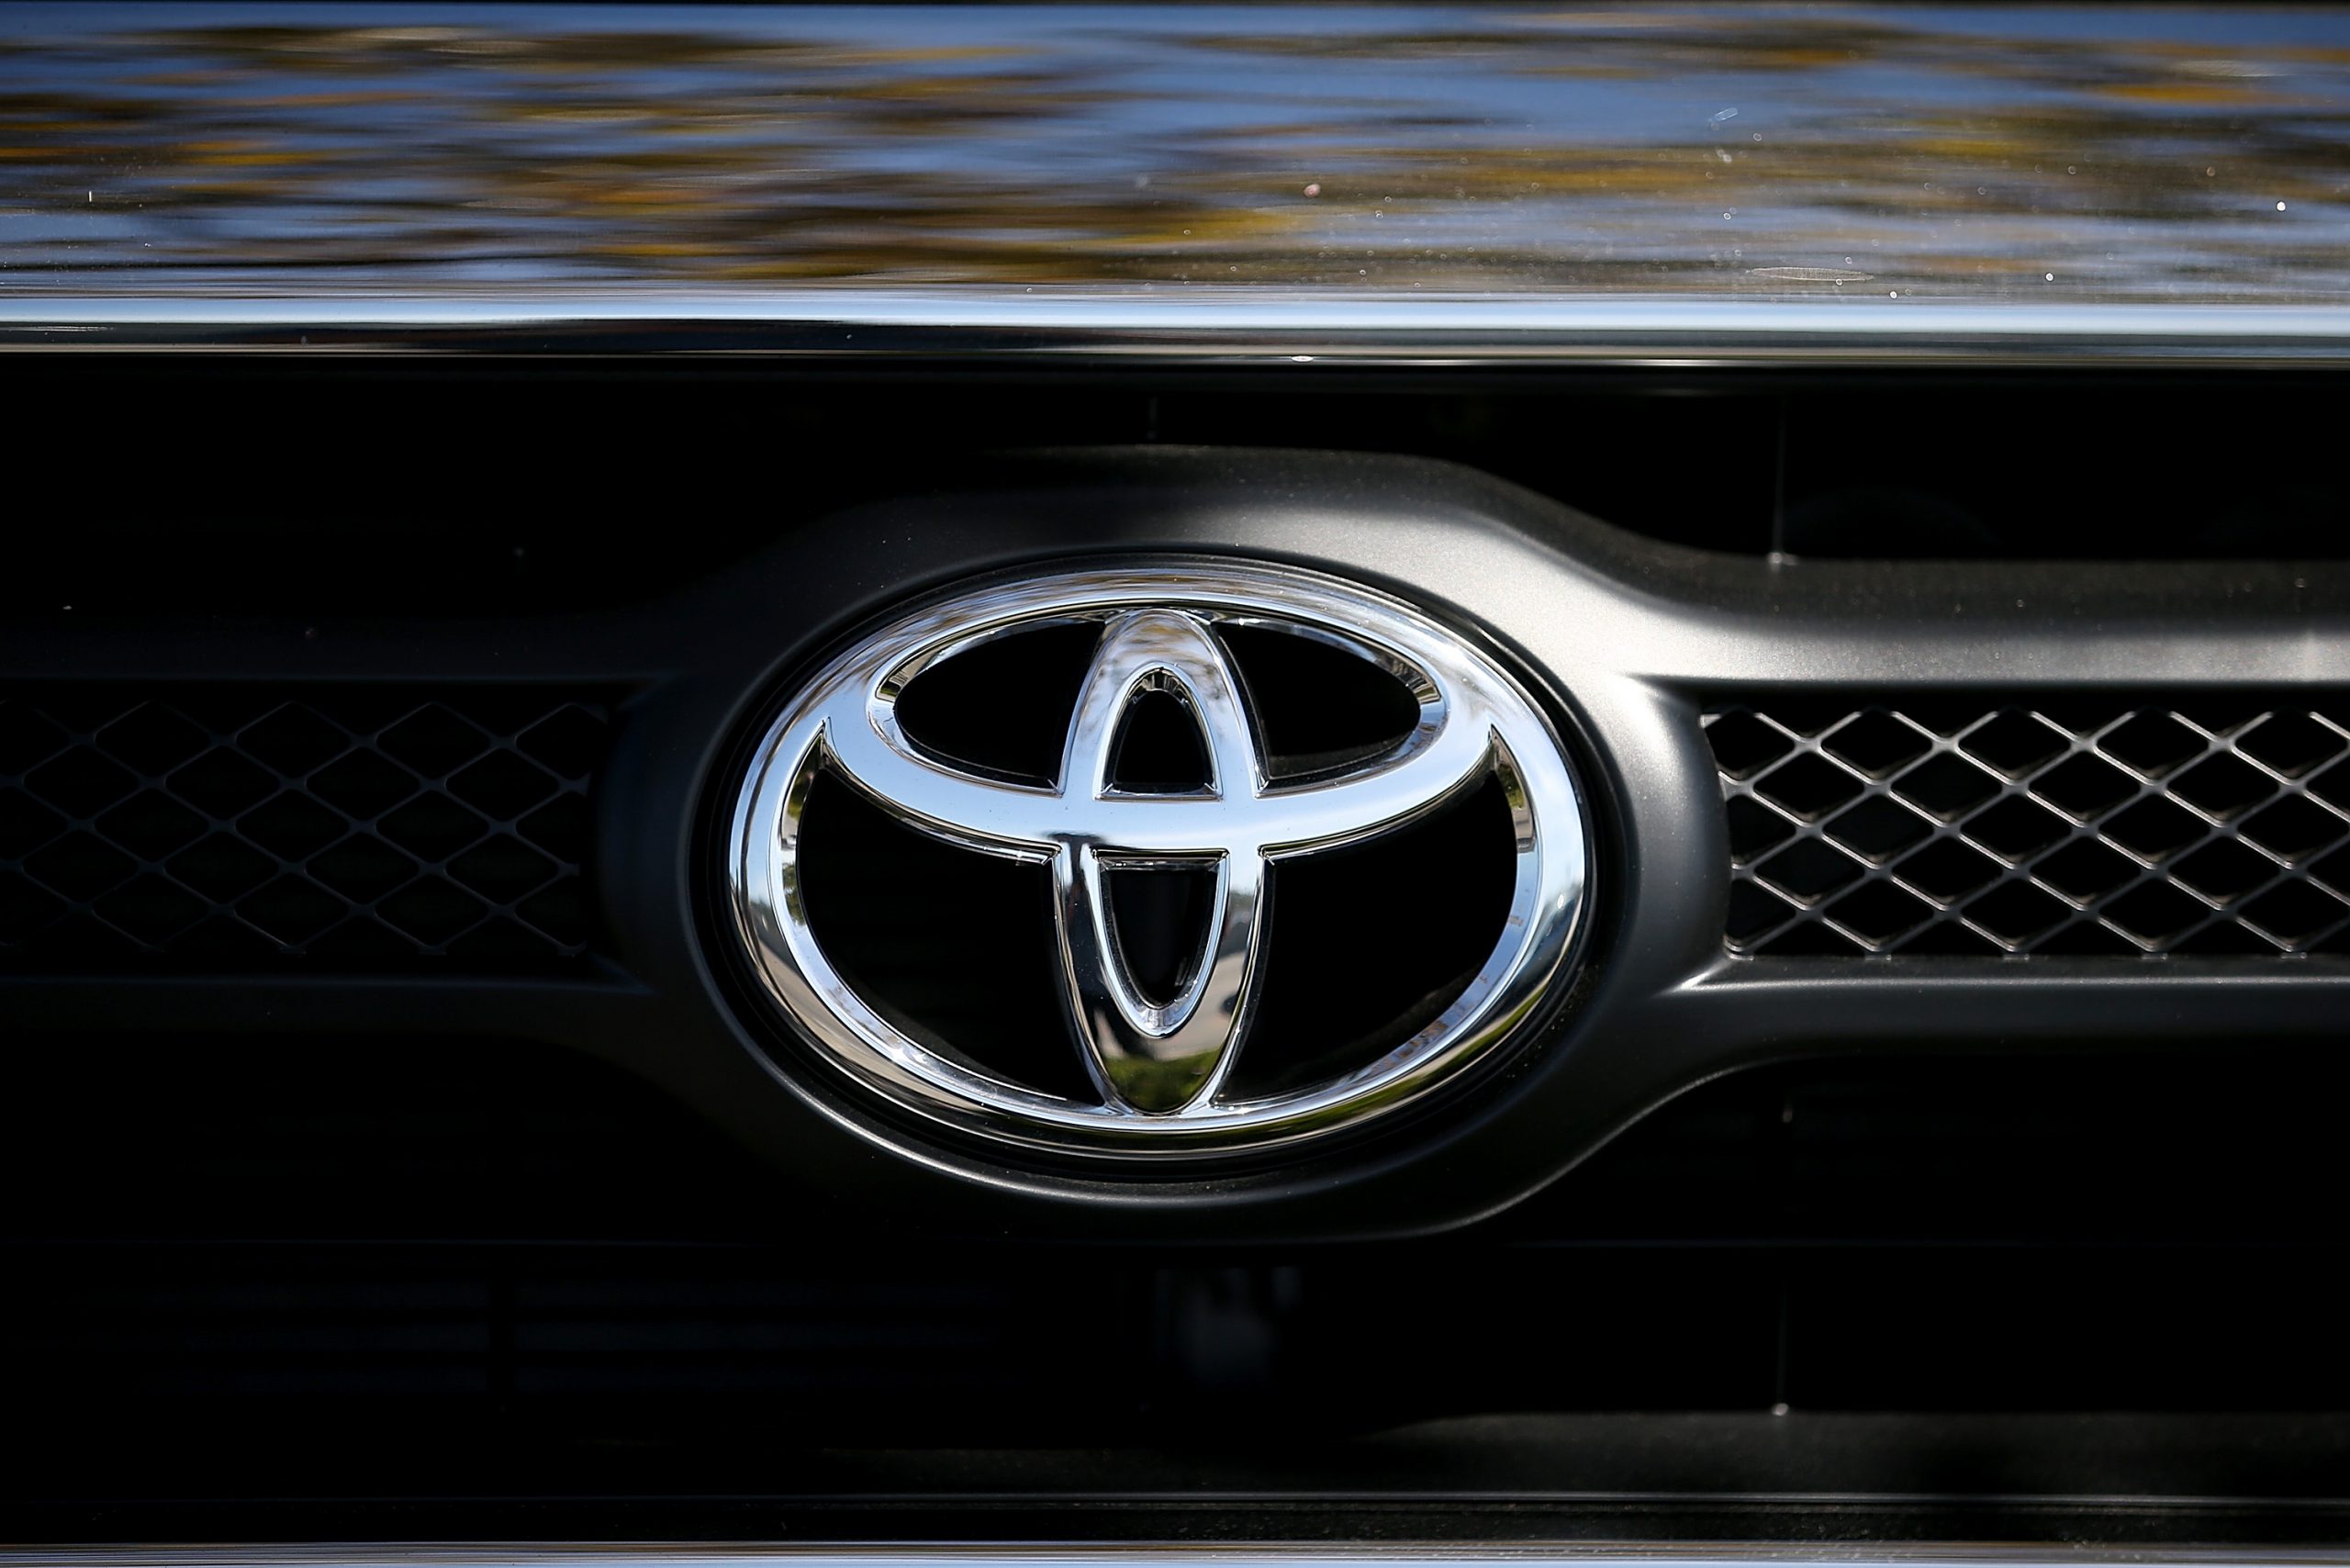 The Toyota logo displayed on the front grille of a truck